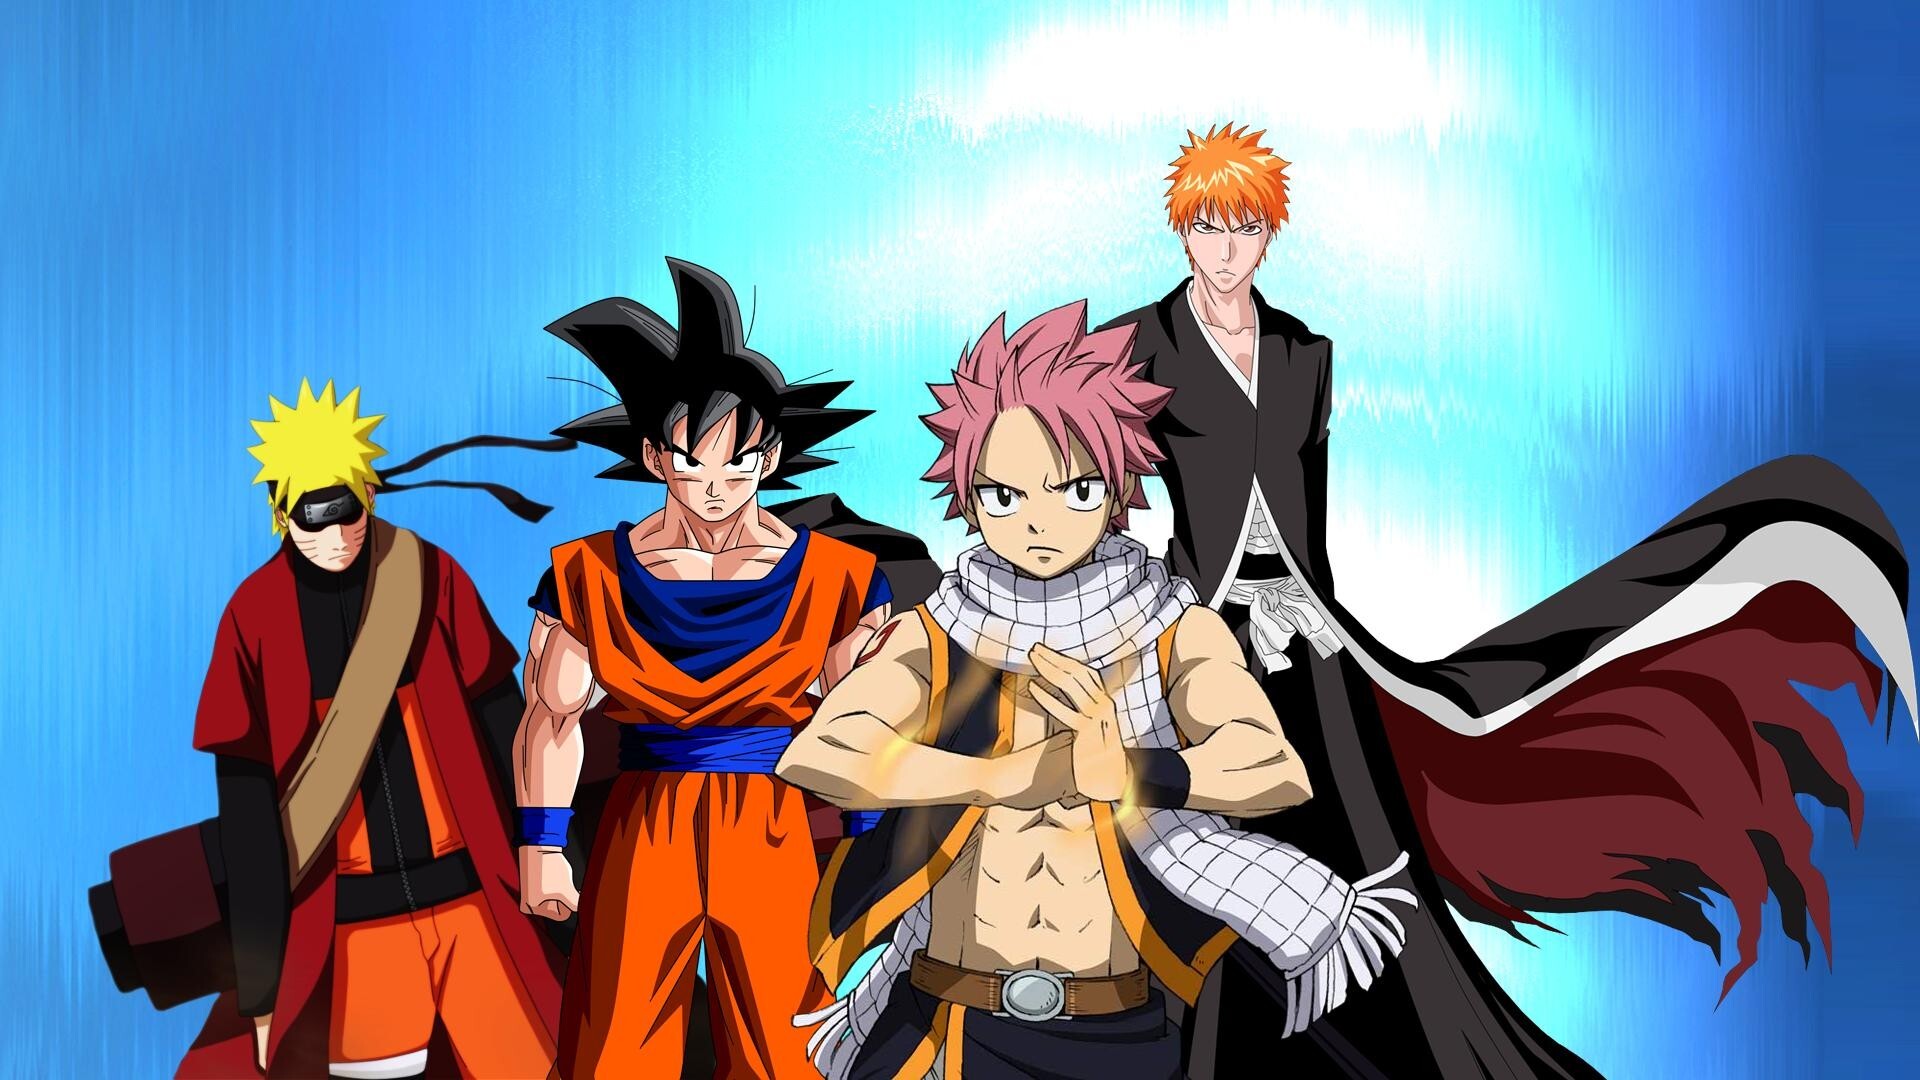 Naruto and Goku wallpaper, Epic crossover, Powerful warriors, Anime legends, 1920x1080 Full HD Desktop